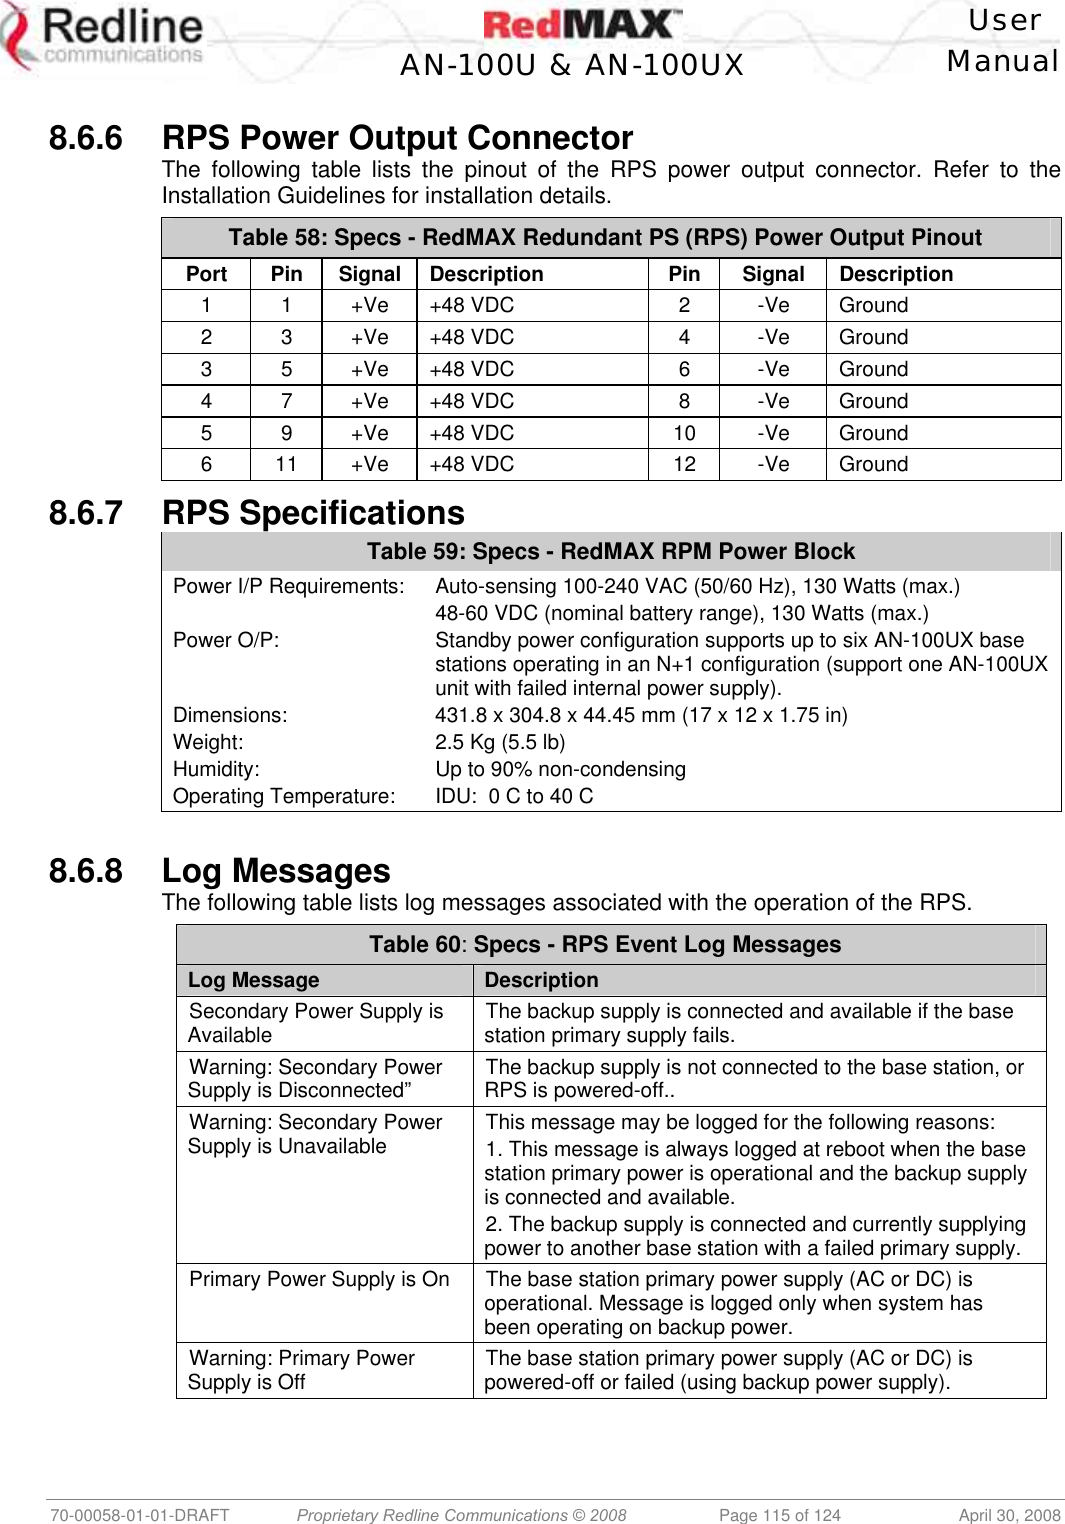    User  AN-100U &amp; AN-100UX Manual   70-00058-01-01-DRAFT  Proprietary Redline Communications © 2008   Page 115 of 124  April 30, 2008  8.6.6  RPS Power Output Connector The following table lists the pinout of the RPS power output connector. Refer to the Installation Guidelines for installation details. Table 58: Specs - RedMAX Redundant PS (RPS) Power Output Pinout Port Pin Signal Description  Pin Signal Description 1 1 +Ve +48 VDC  2 -Ve Ground 2 3 +Ve +48 VDC  4 -Ve Ground 3 5 +Ve +48 VDC  6 -Ve Ground 4 7 +Ve +48 VDC  8 -Ve Ground 5 9 +Ve +48 VDC  10 -Ve Ground 6 11 +Ve +48 VDC  12 -Ve Ground 8.6.7 RPS Specifications Table 59: Specs - RedMAX RPM Power Block Power I/P Requirements:  Auto-sensing 100-240 VAC (50/60 Hz), 130 Watts (max.)   48-60 VDC (nominal battery range), 130 Watts (max.) Power O/P:  Standby power configuration supports up to six AN-100UX base stations operating in an N+1 configuration (support one AN-100UX unit with failed internal power supply). Dimensions:   431.8 x 304.8 x 44.45 mm (17 x 12 x 1.75 in) Weight:  2.5 Kg (5.5 lb) Humidity:  Up to 90% non-condensing Operating Temperature:  IDU:  0 C to 40 C  8.6.8 Log Messages The following table lists log messages associated with the operation of the RPS. Table 60: Specs - RPS Event Log Messages Log Message  Description Secondary Power Supply is Available  The backup supply is connected and available if the base station primary supply fails. Warning: Secondary Power Supply is Disconnected”  The backup supply is not connected to the base station, or RPS is powered-off.. Warning: Secondary Power Supply is Unavailable  This message may be logged for the following reasons: 1. This message is always logged at reboot when the base station primary power is operational and the backup supply is connected and available. 2. The backup supply is connected and currently supplying power to another base station with a failed primary supply. Primary Power Supply is On  The base station primary power supply (AC or DC) is operational. Message is logged only when system has been operating on backup power.  Warning: Primary Power Supply is Off  The base station primary power supply (AC or DC) is powered-off or failed (using backup power supply).  